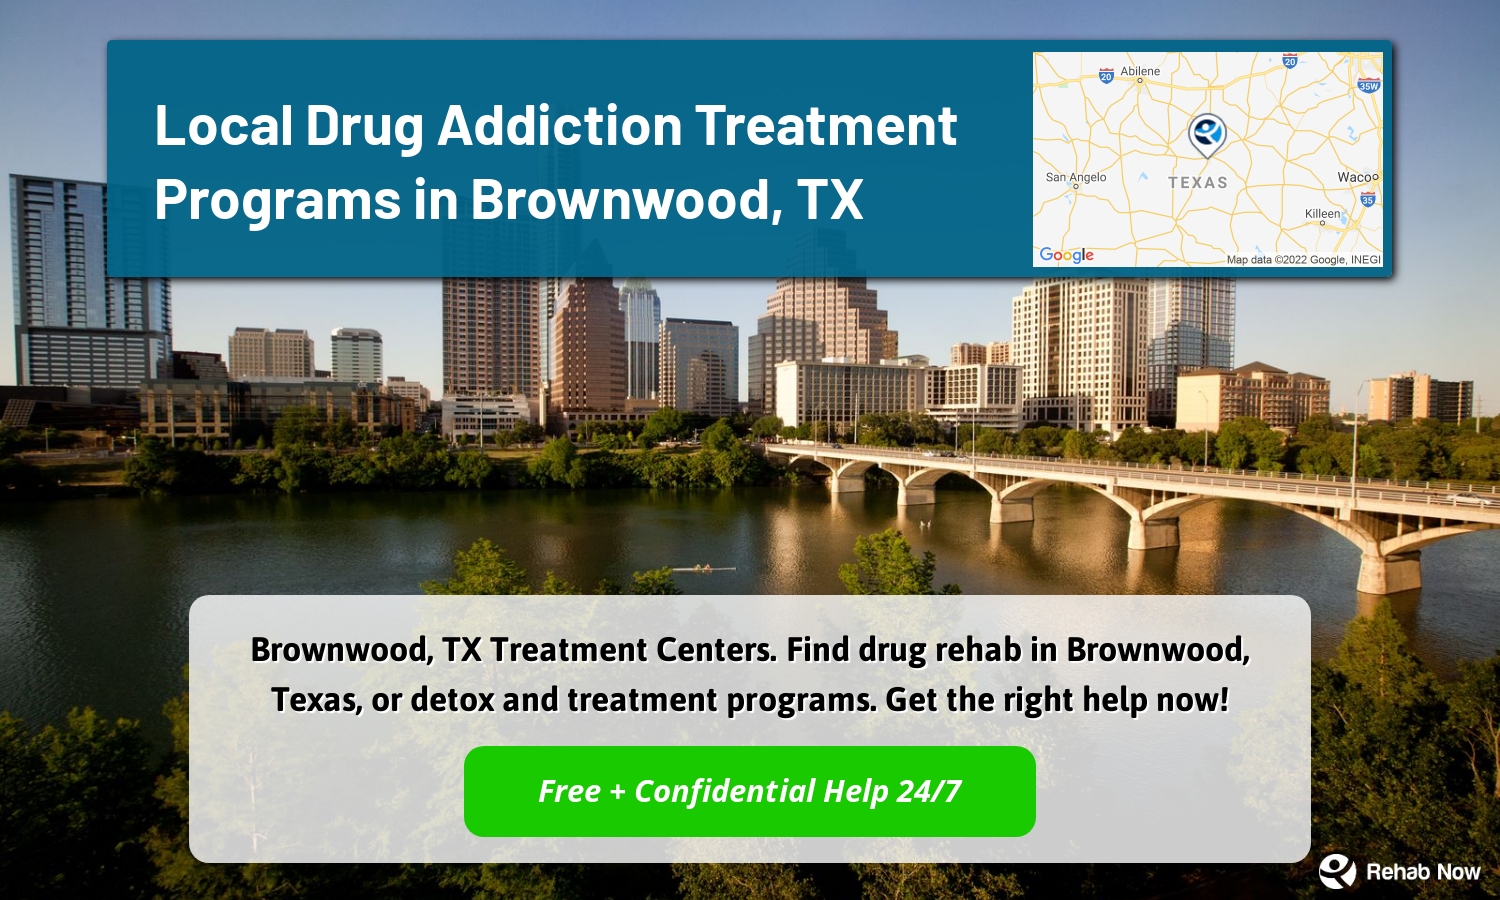 Brownwood, TX Treatment Centers. Find drug rehab in Brownwood, Texas, or detox and treatment programs. Get the right help now!